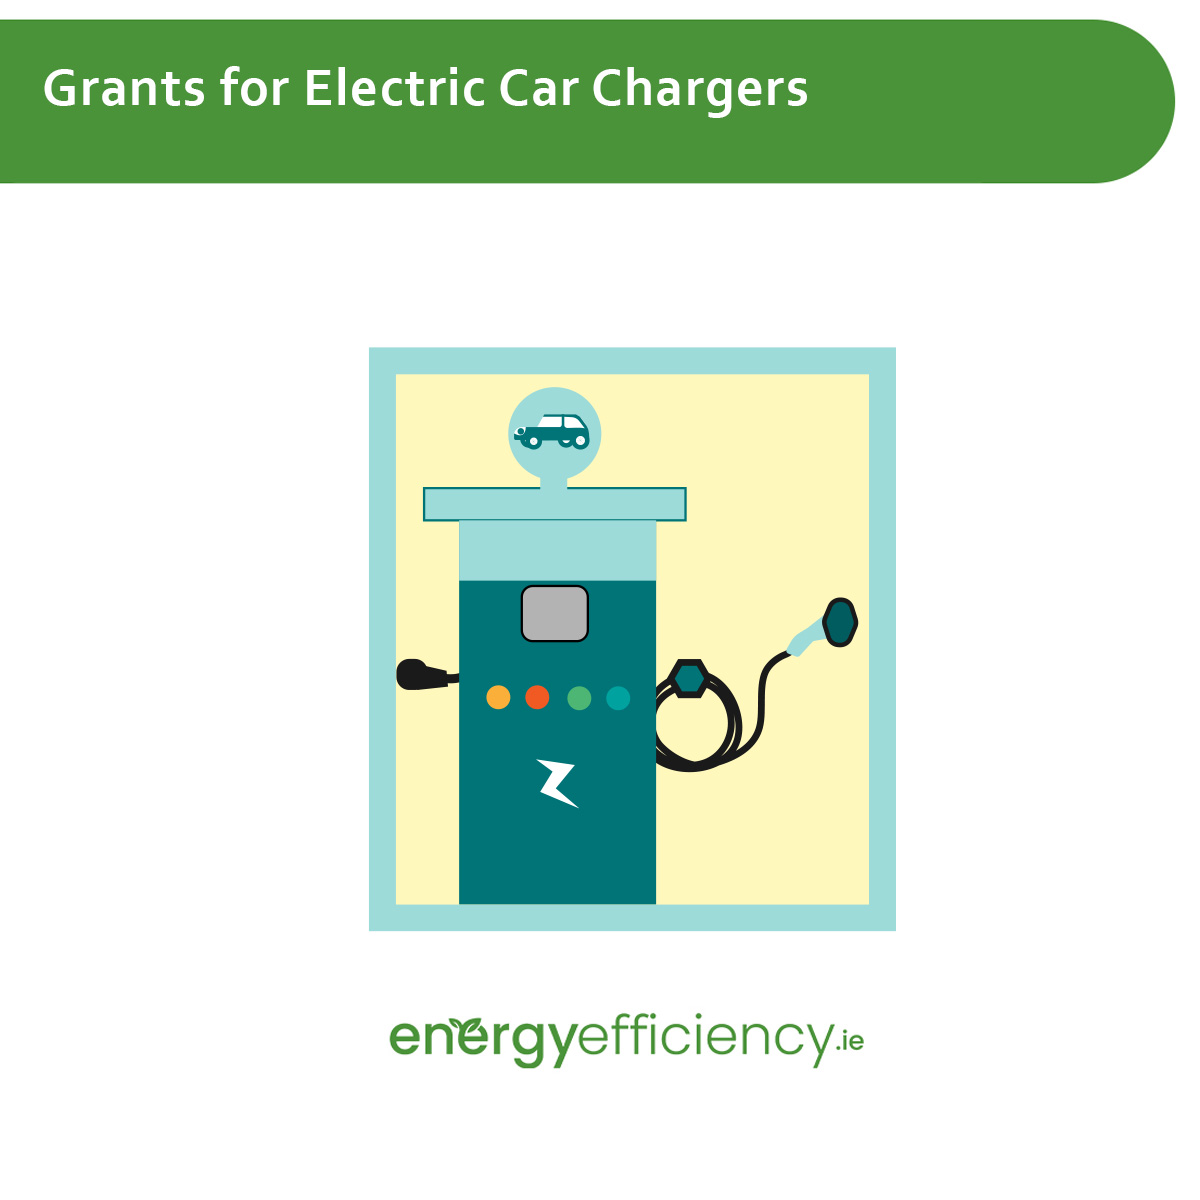 Grants for Electric Car Chargers